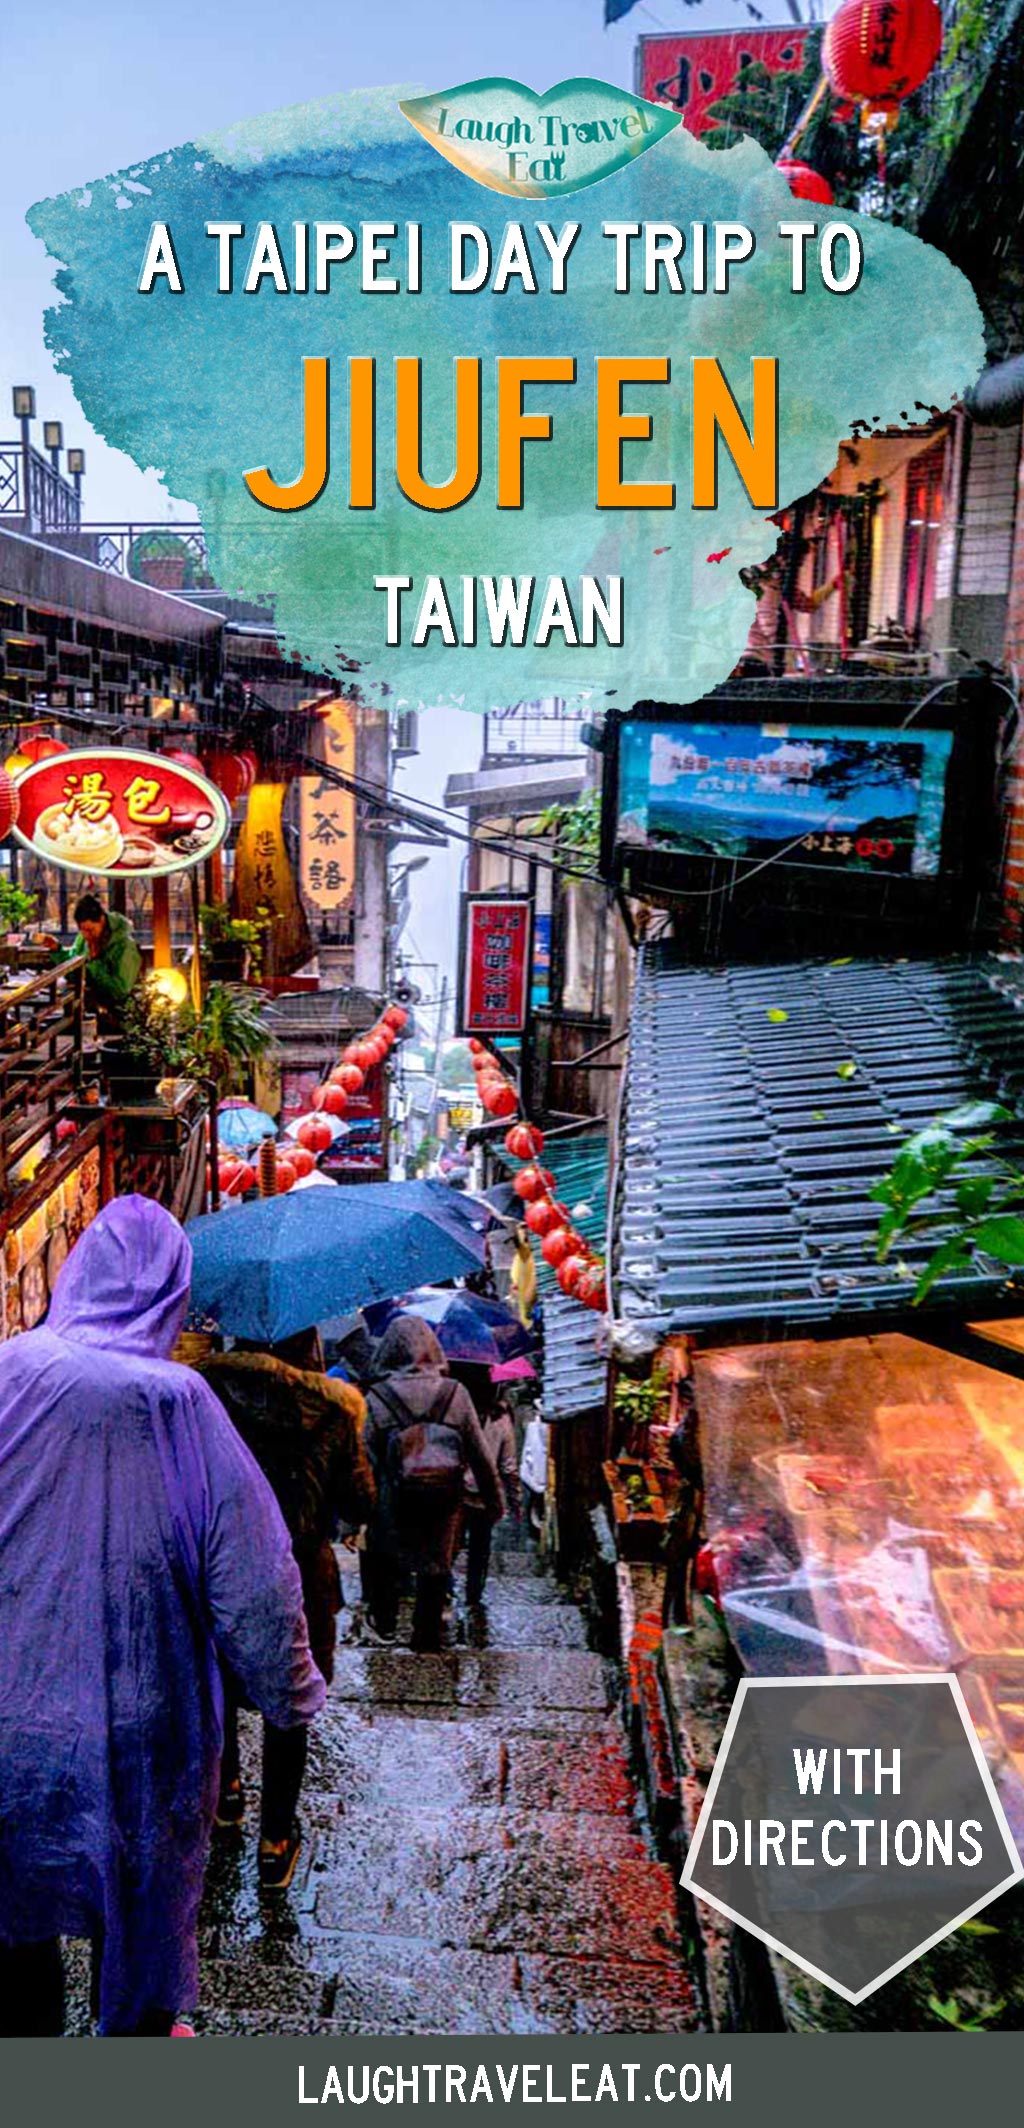 Taipei to Jiufen is a perfect day trip. Here's a guide on how to get to Jiufen as well as what to see around Jiufen Old Street: